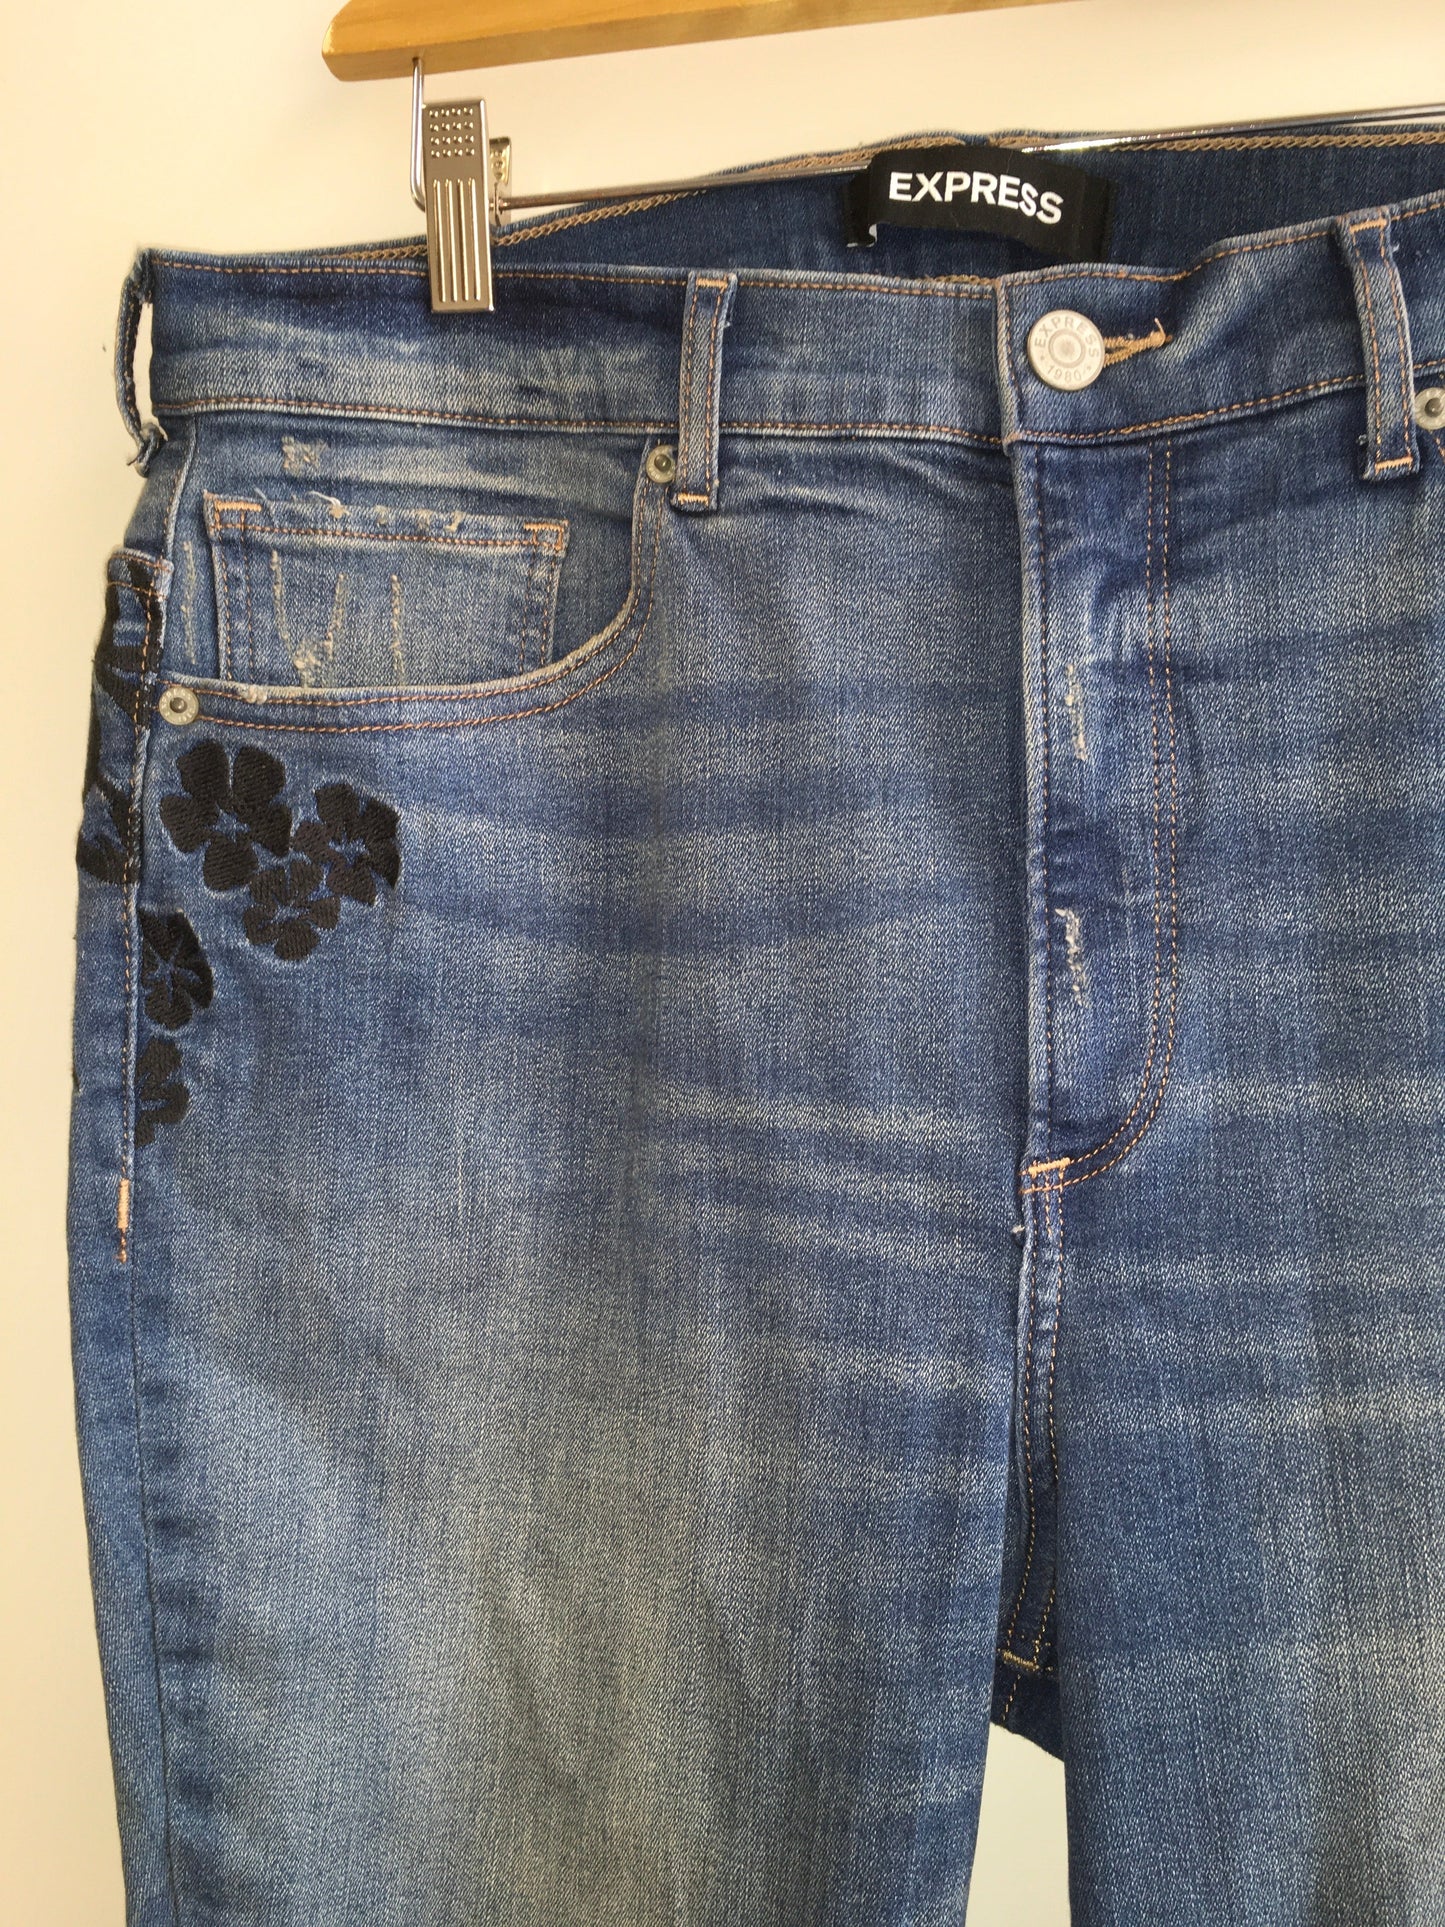 Jeans Skinny By Express  Size: 14tall